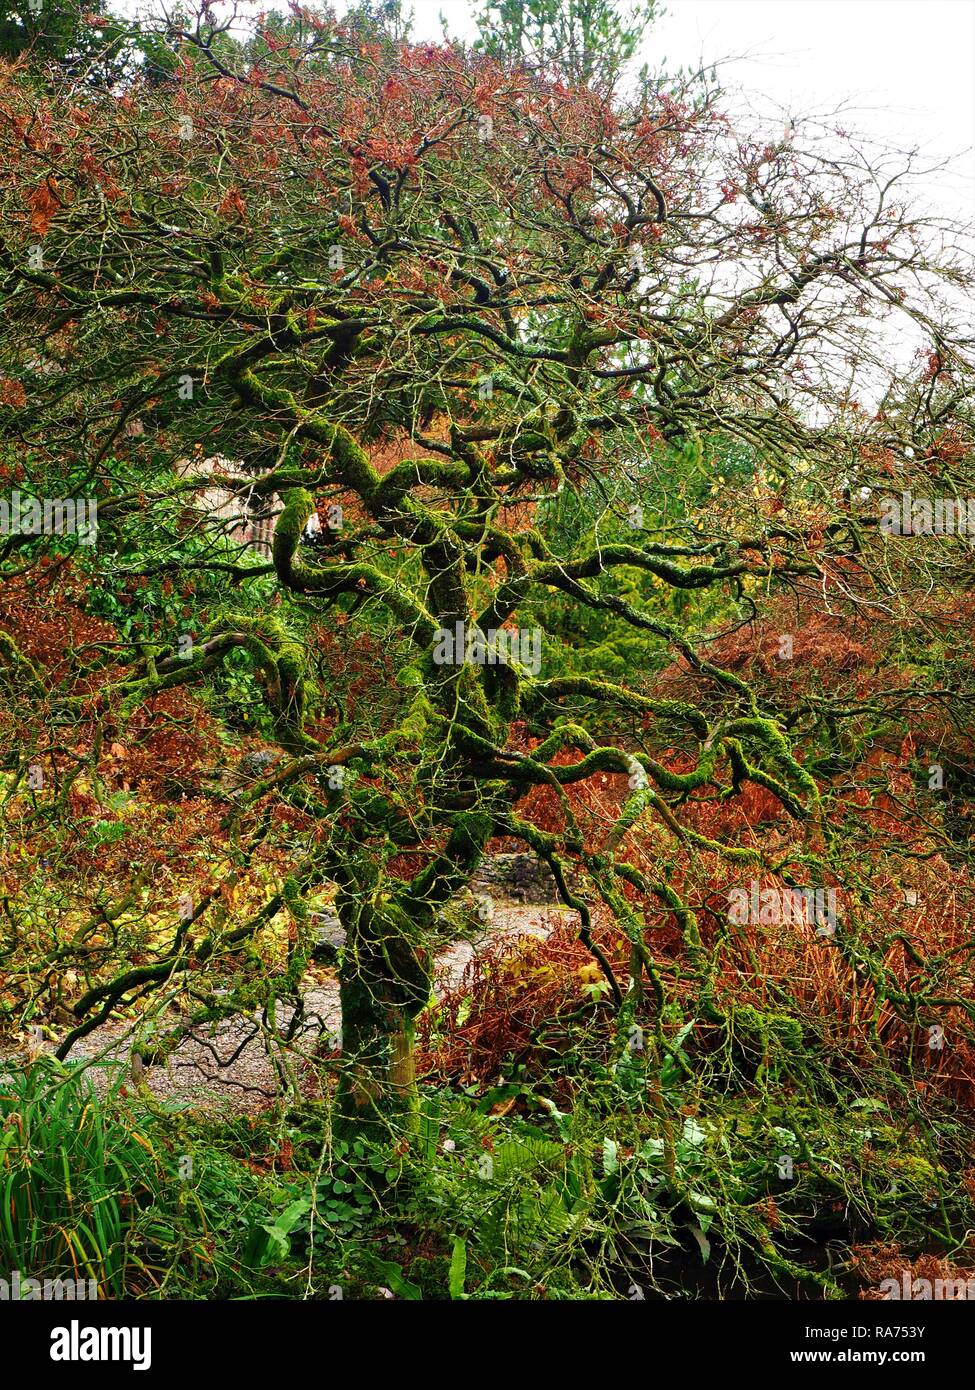 Tree with twisted mossy branches in a garden in winter Stock Photo